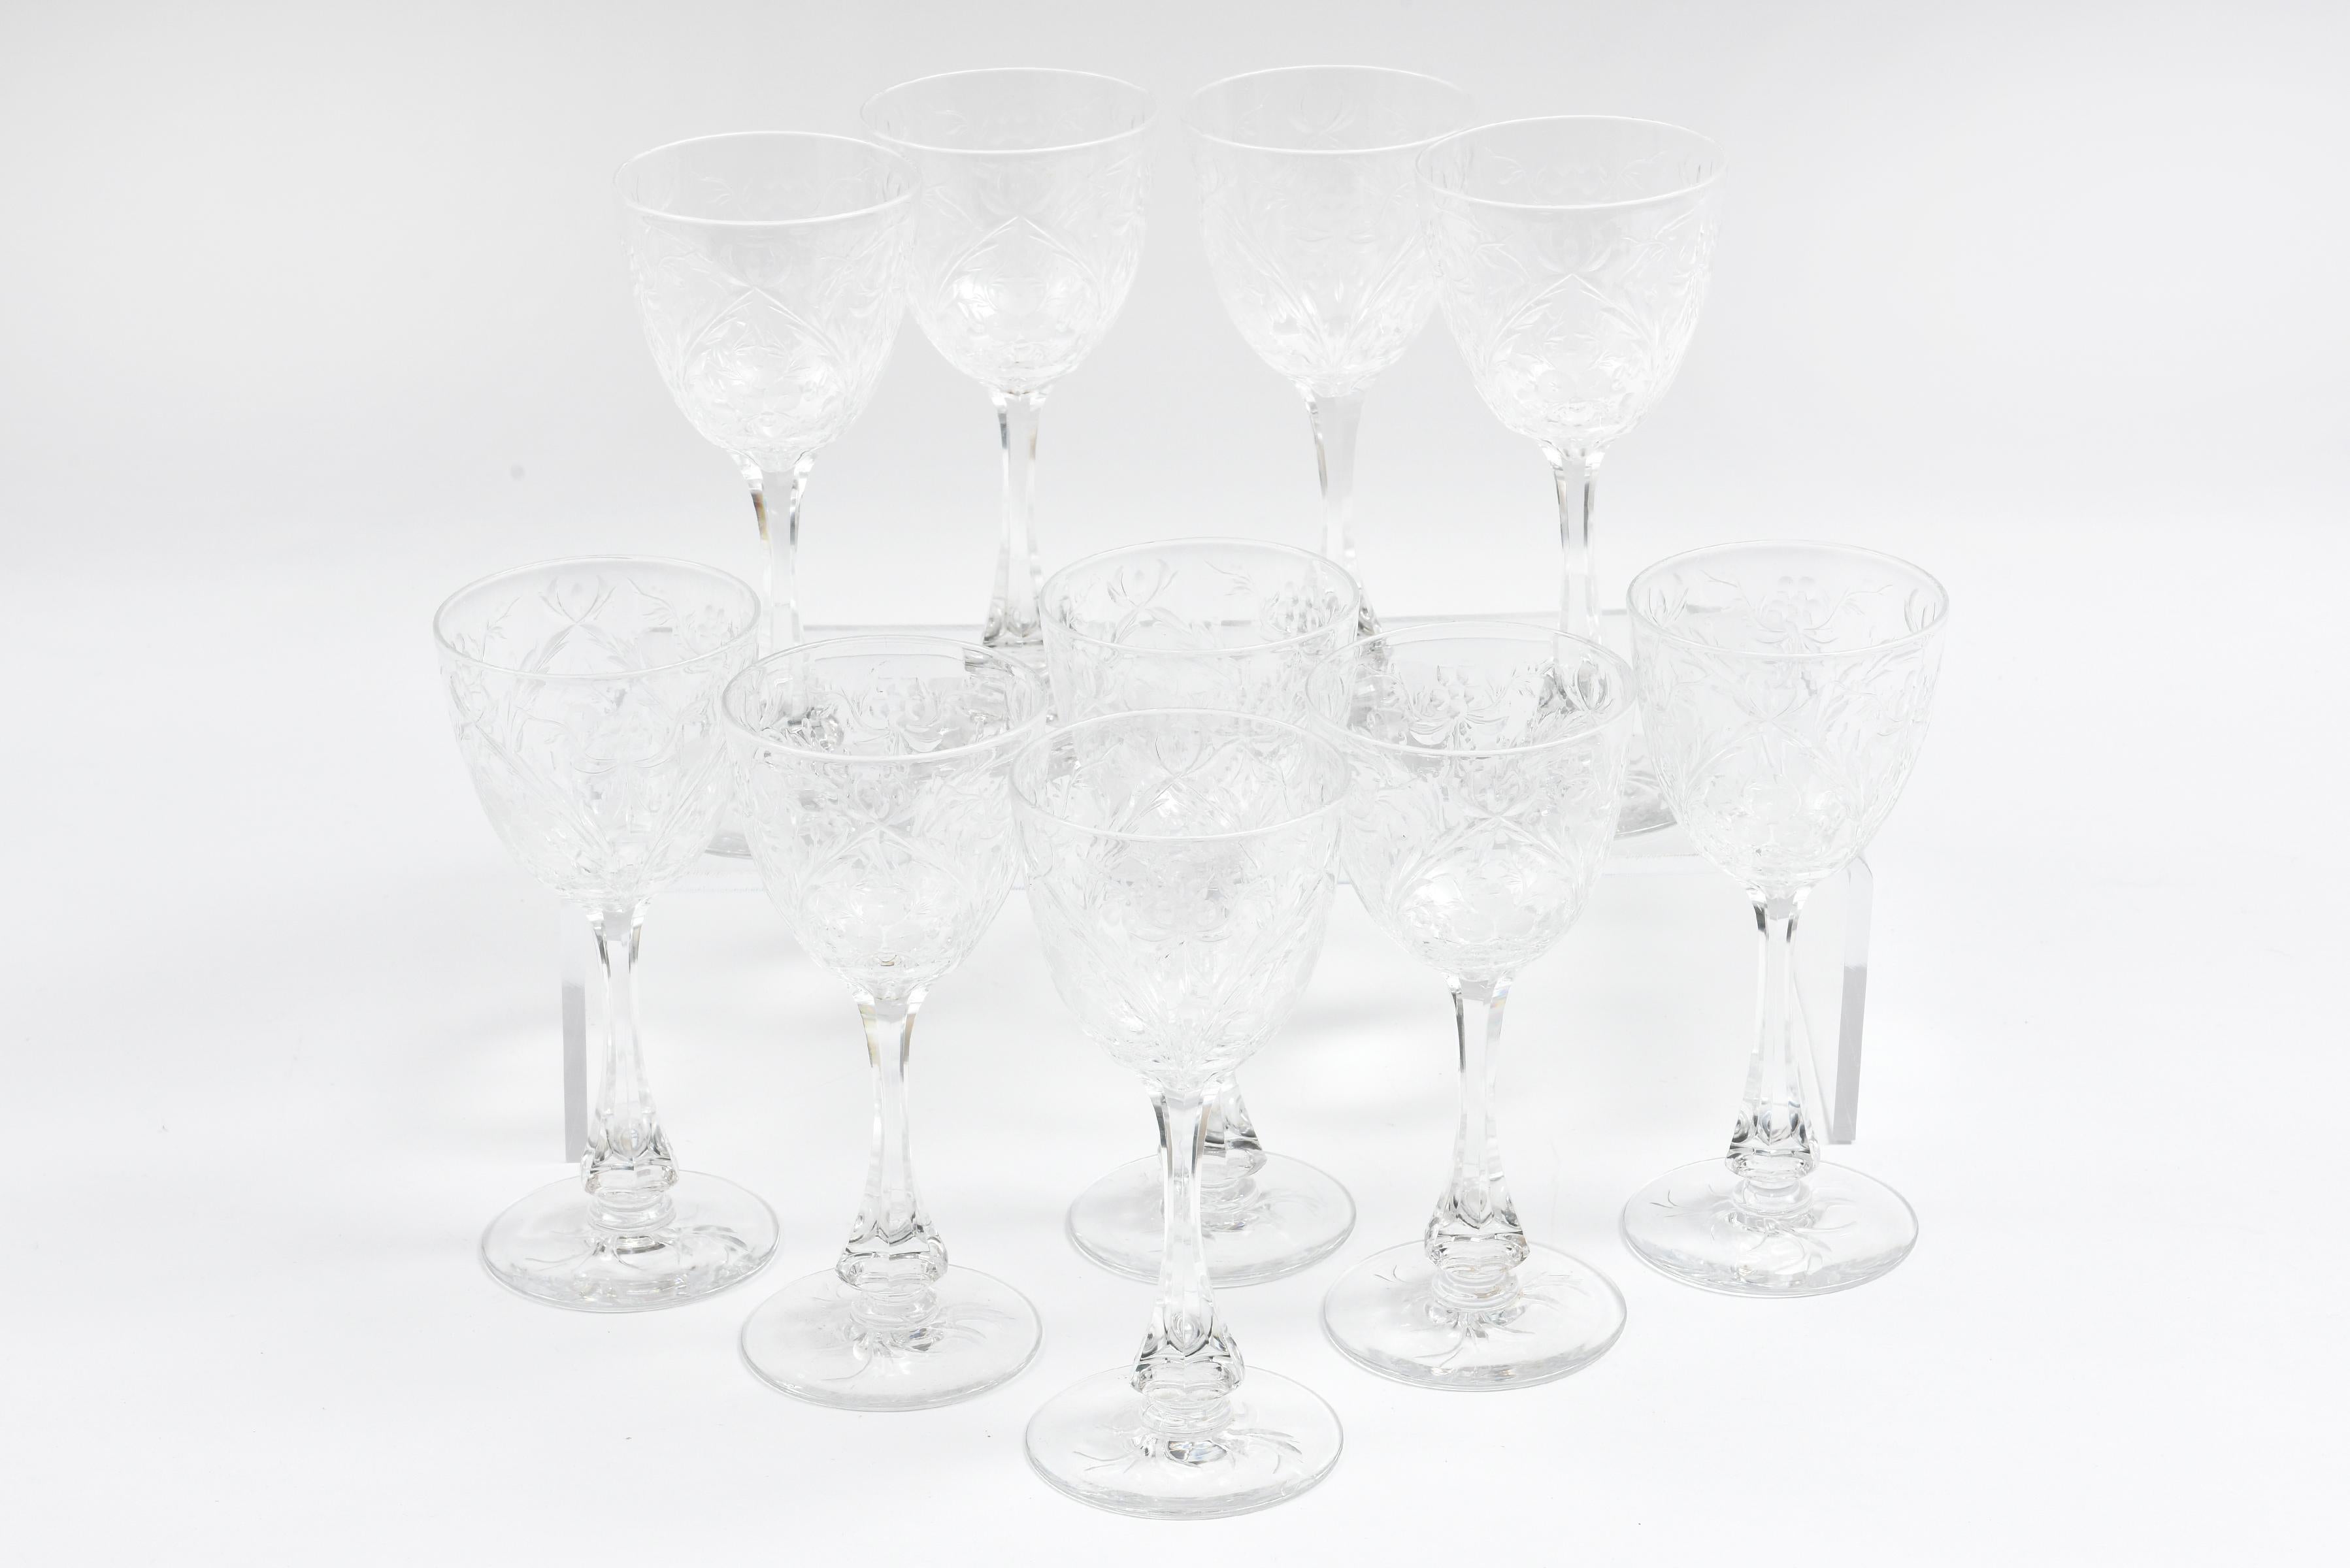 Wonderful crisp clear crystal set of 10 goblets with a hand engraved floral design. Elegant stem which feels so nice in your hands. Well balanced and perfect to mix and match in with all your fine tabletop.